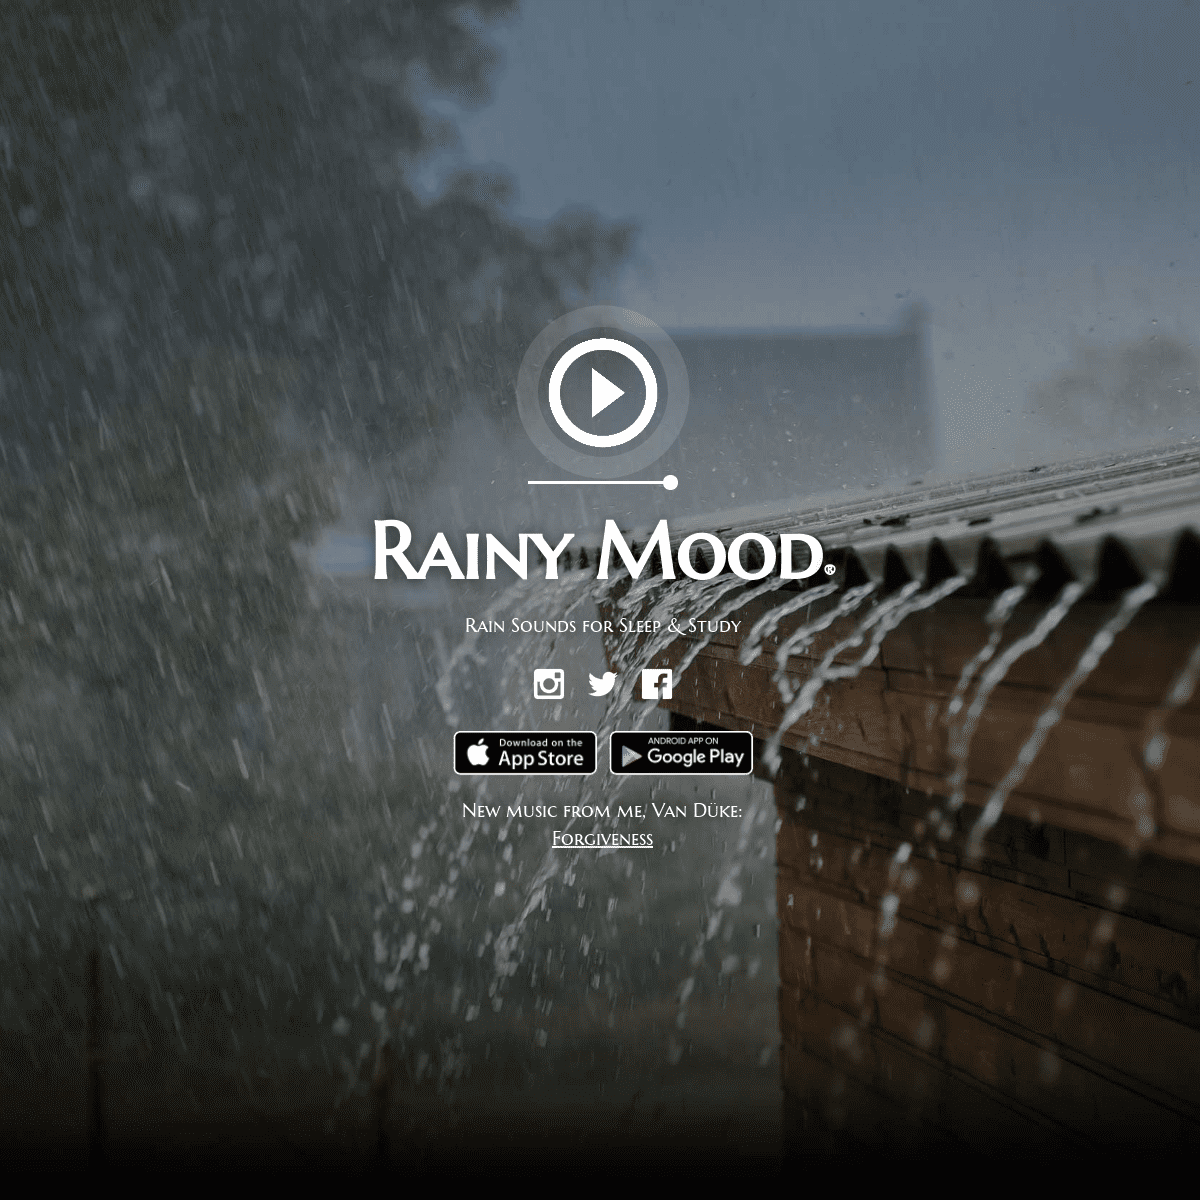 A complete backup of https://rainymood.com